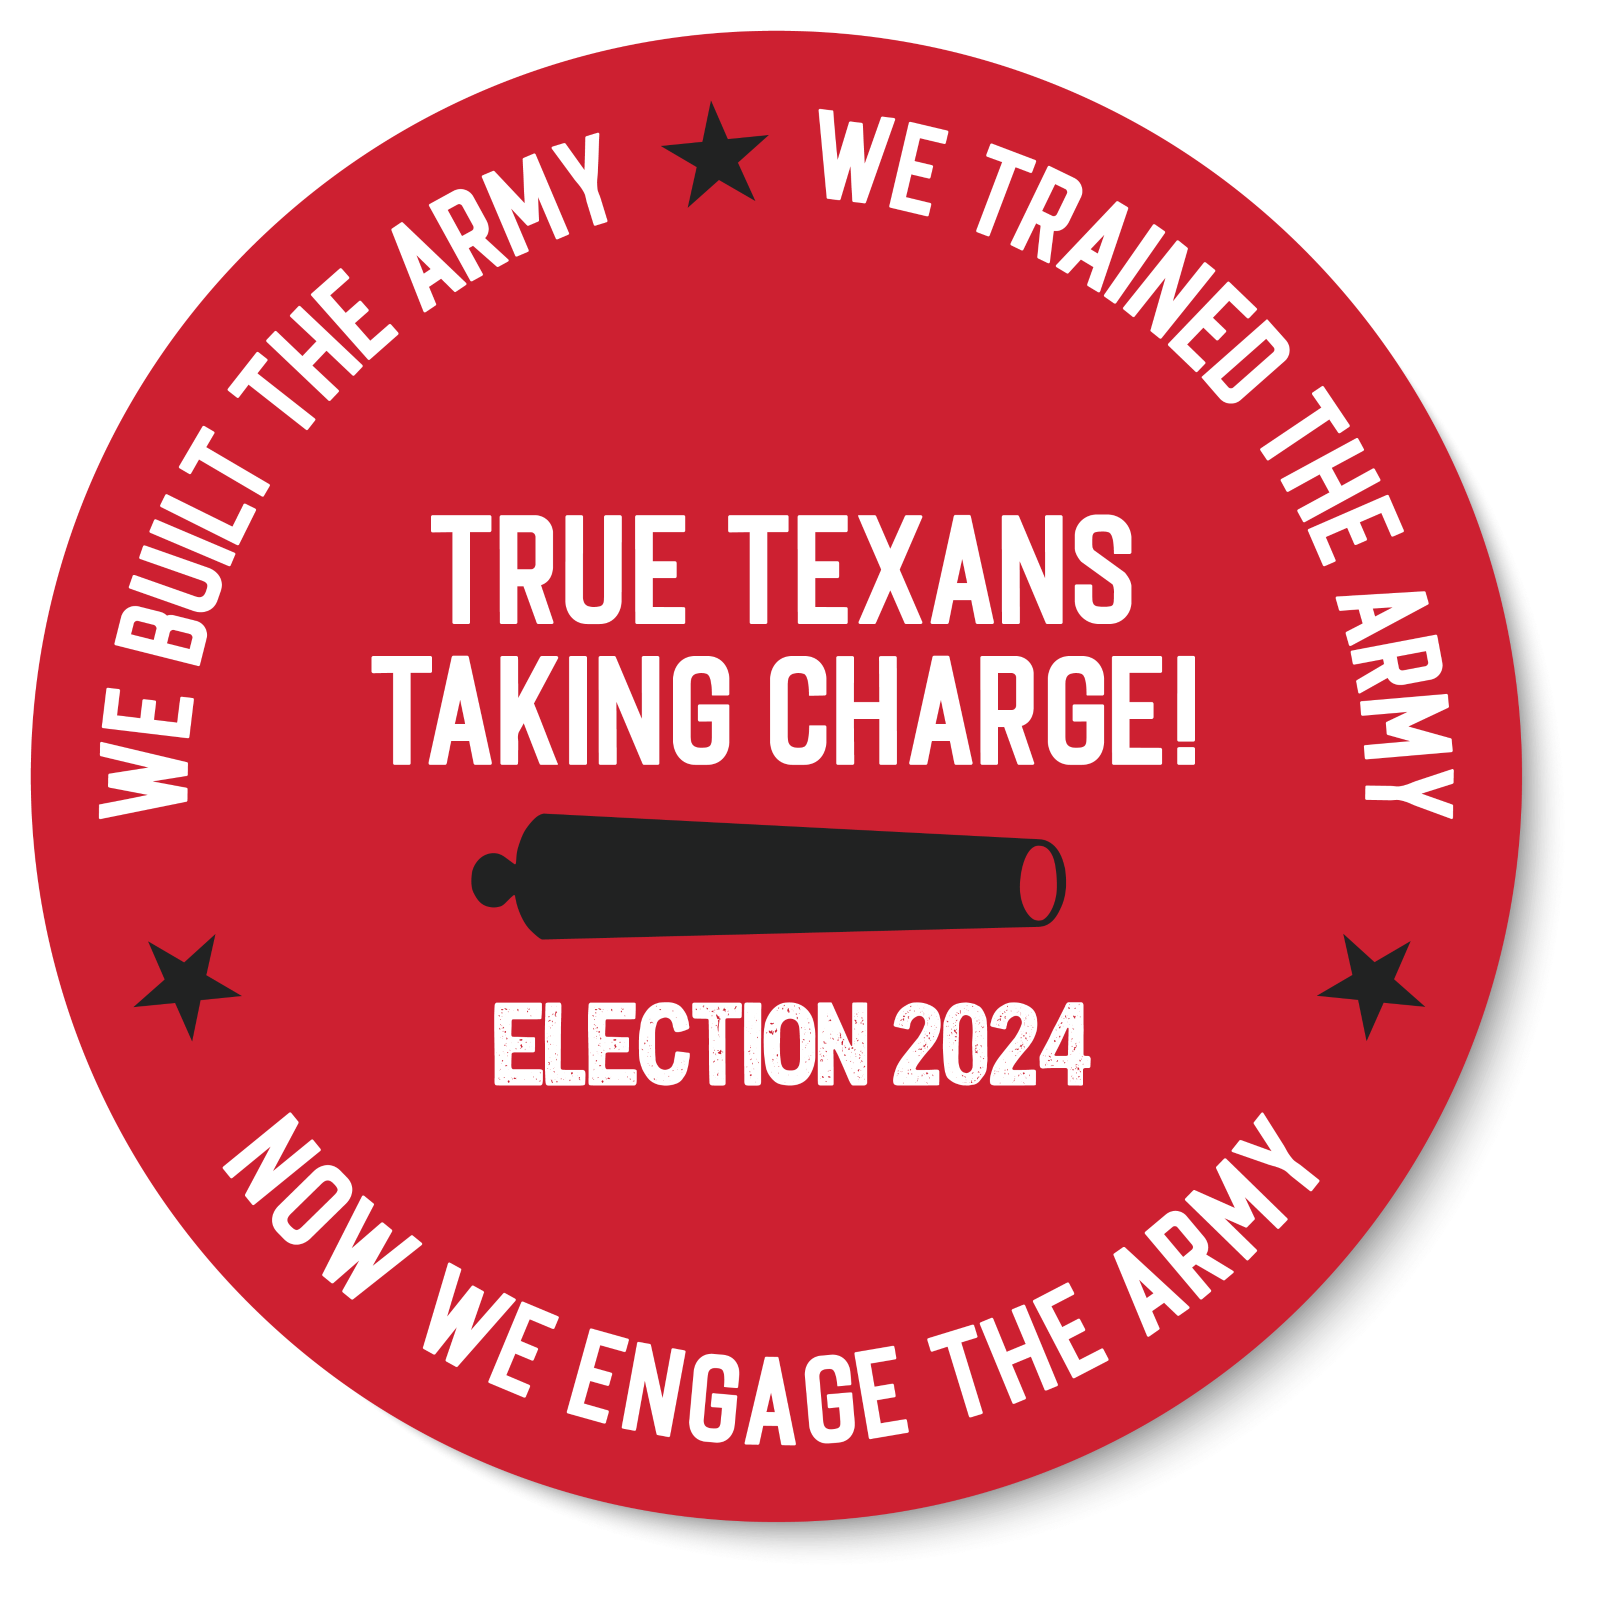 True%20TX%20Taking%20Charge.png